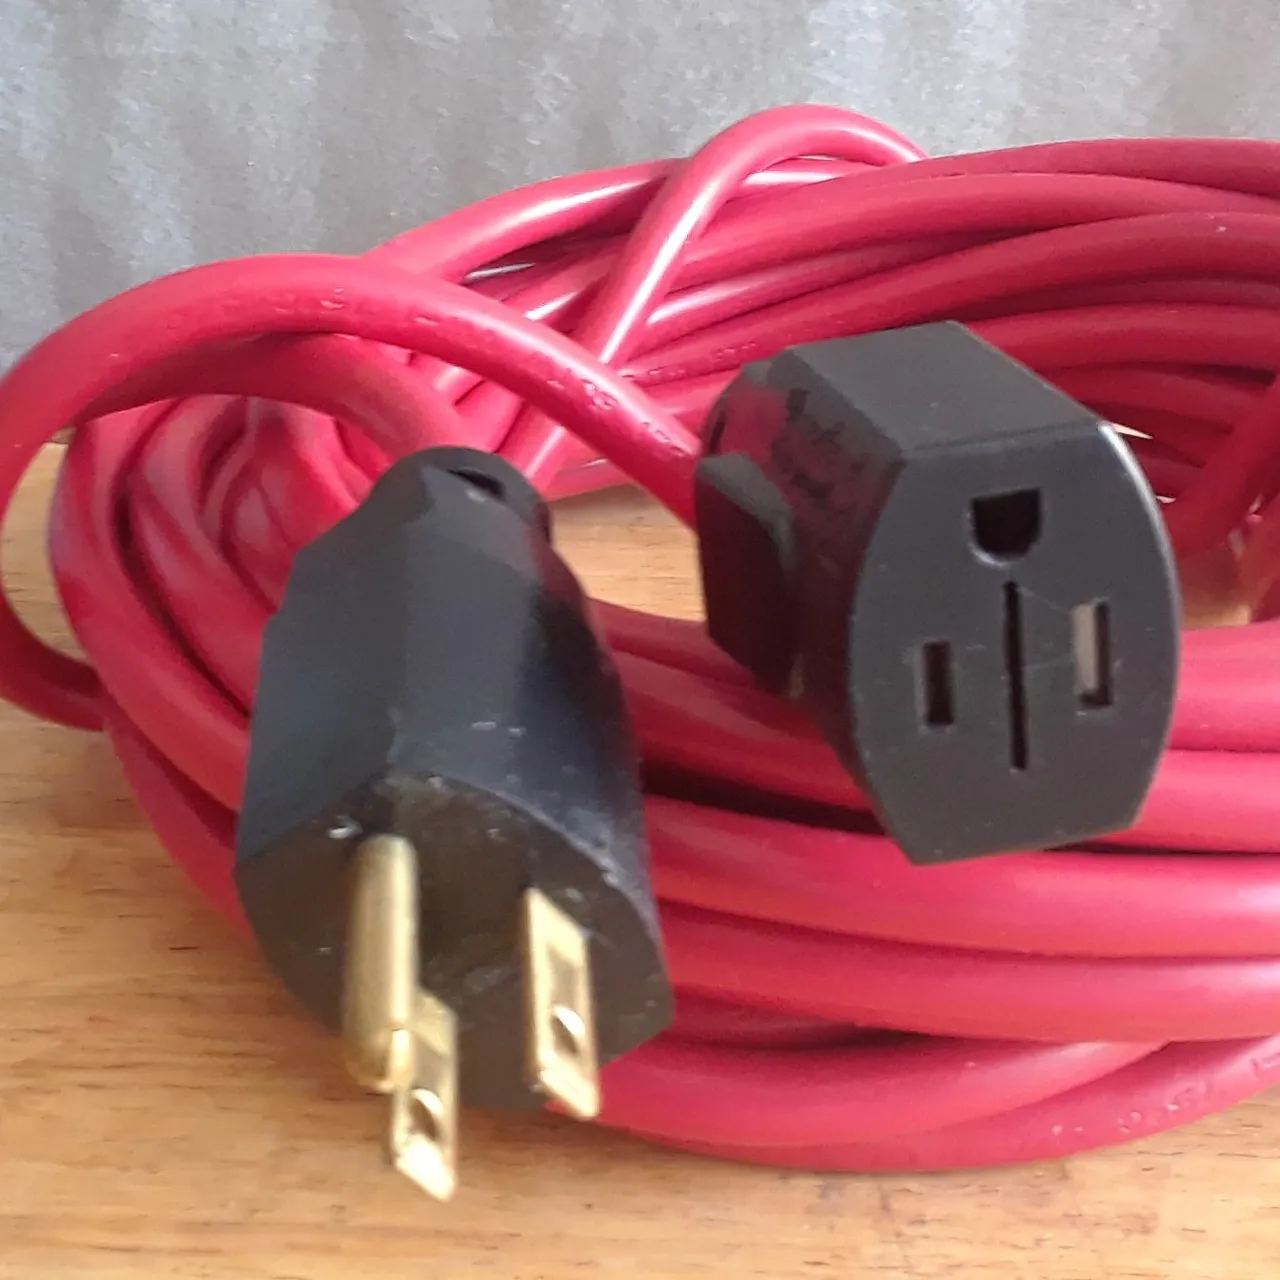 9 Metre / 32 foot red extension cord 3 prong with ground photo 3